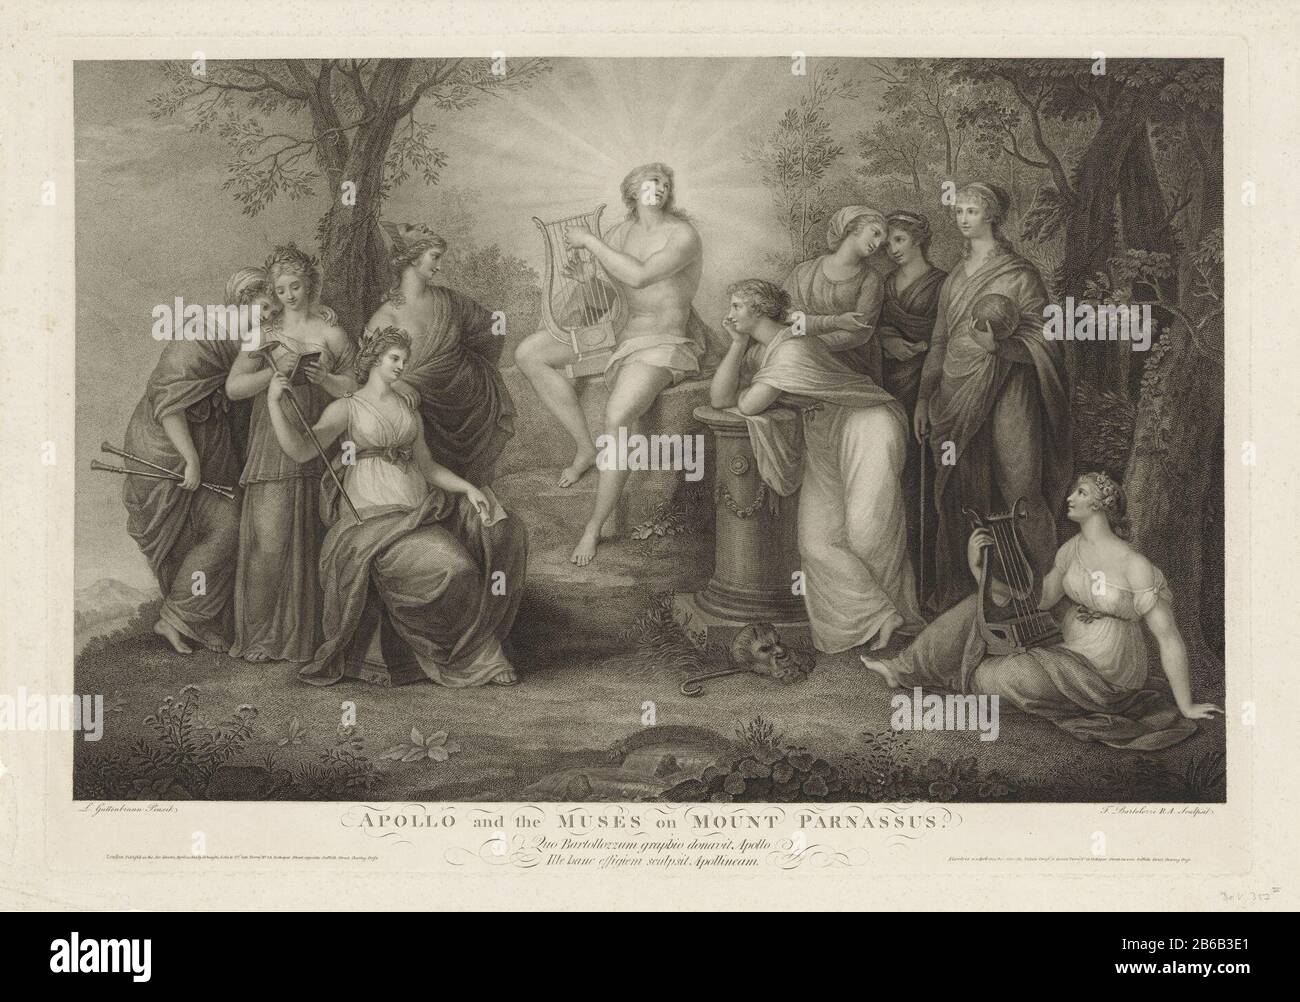 Apollo and the Muses on Parnassus Apollo and the Muses on Mount Parnassus (title object) Apollo playing his lyre among the nine Muses on Parnassus. Manufacturer : printmaker: Francesco Bartolozzi (listed property) to painting: Ludwig Guttenbrunn ( listed on object) publisher: Colnaghi & Co (listed property) Place manufacture: printmaker: Italy Publisher: London Date: 1800 Physical features: etching and engra material: paper Technique: etching / engra (printing process) Dimensions: plate edge: h 532 mm × W 770 mm Subject (story of) Apollo (Phoebus) Apollo and the Muses, Apollo Musagetes Stock Photo